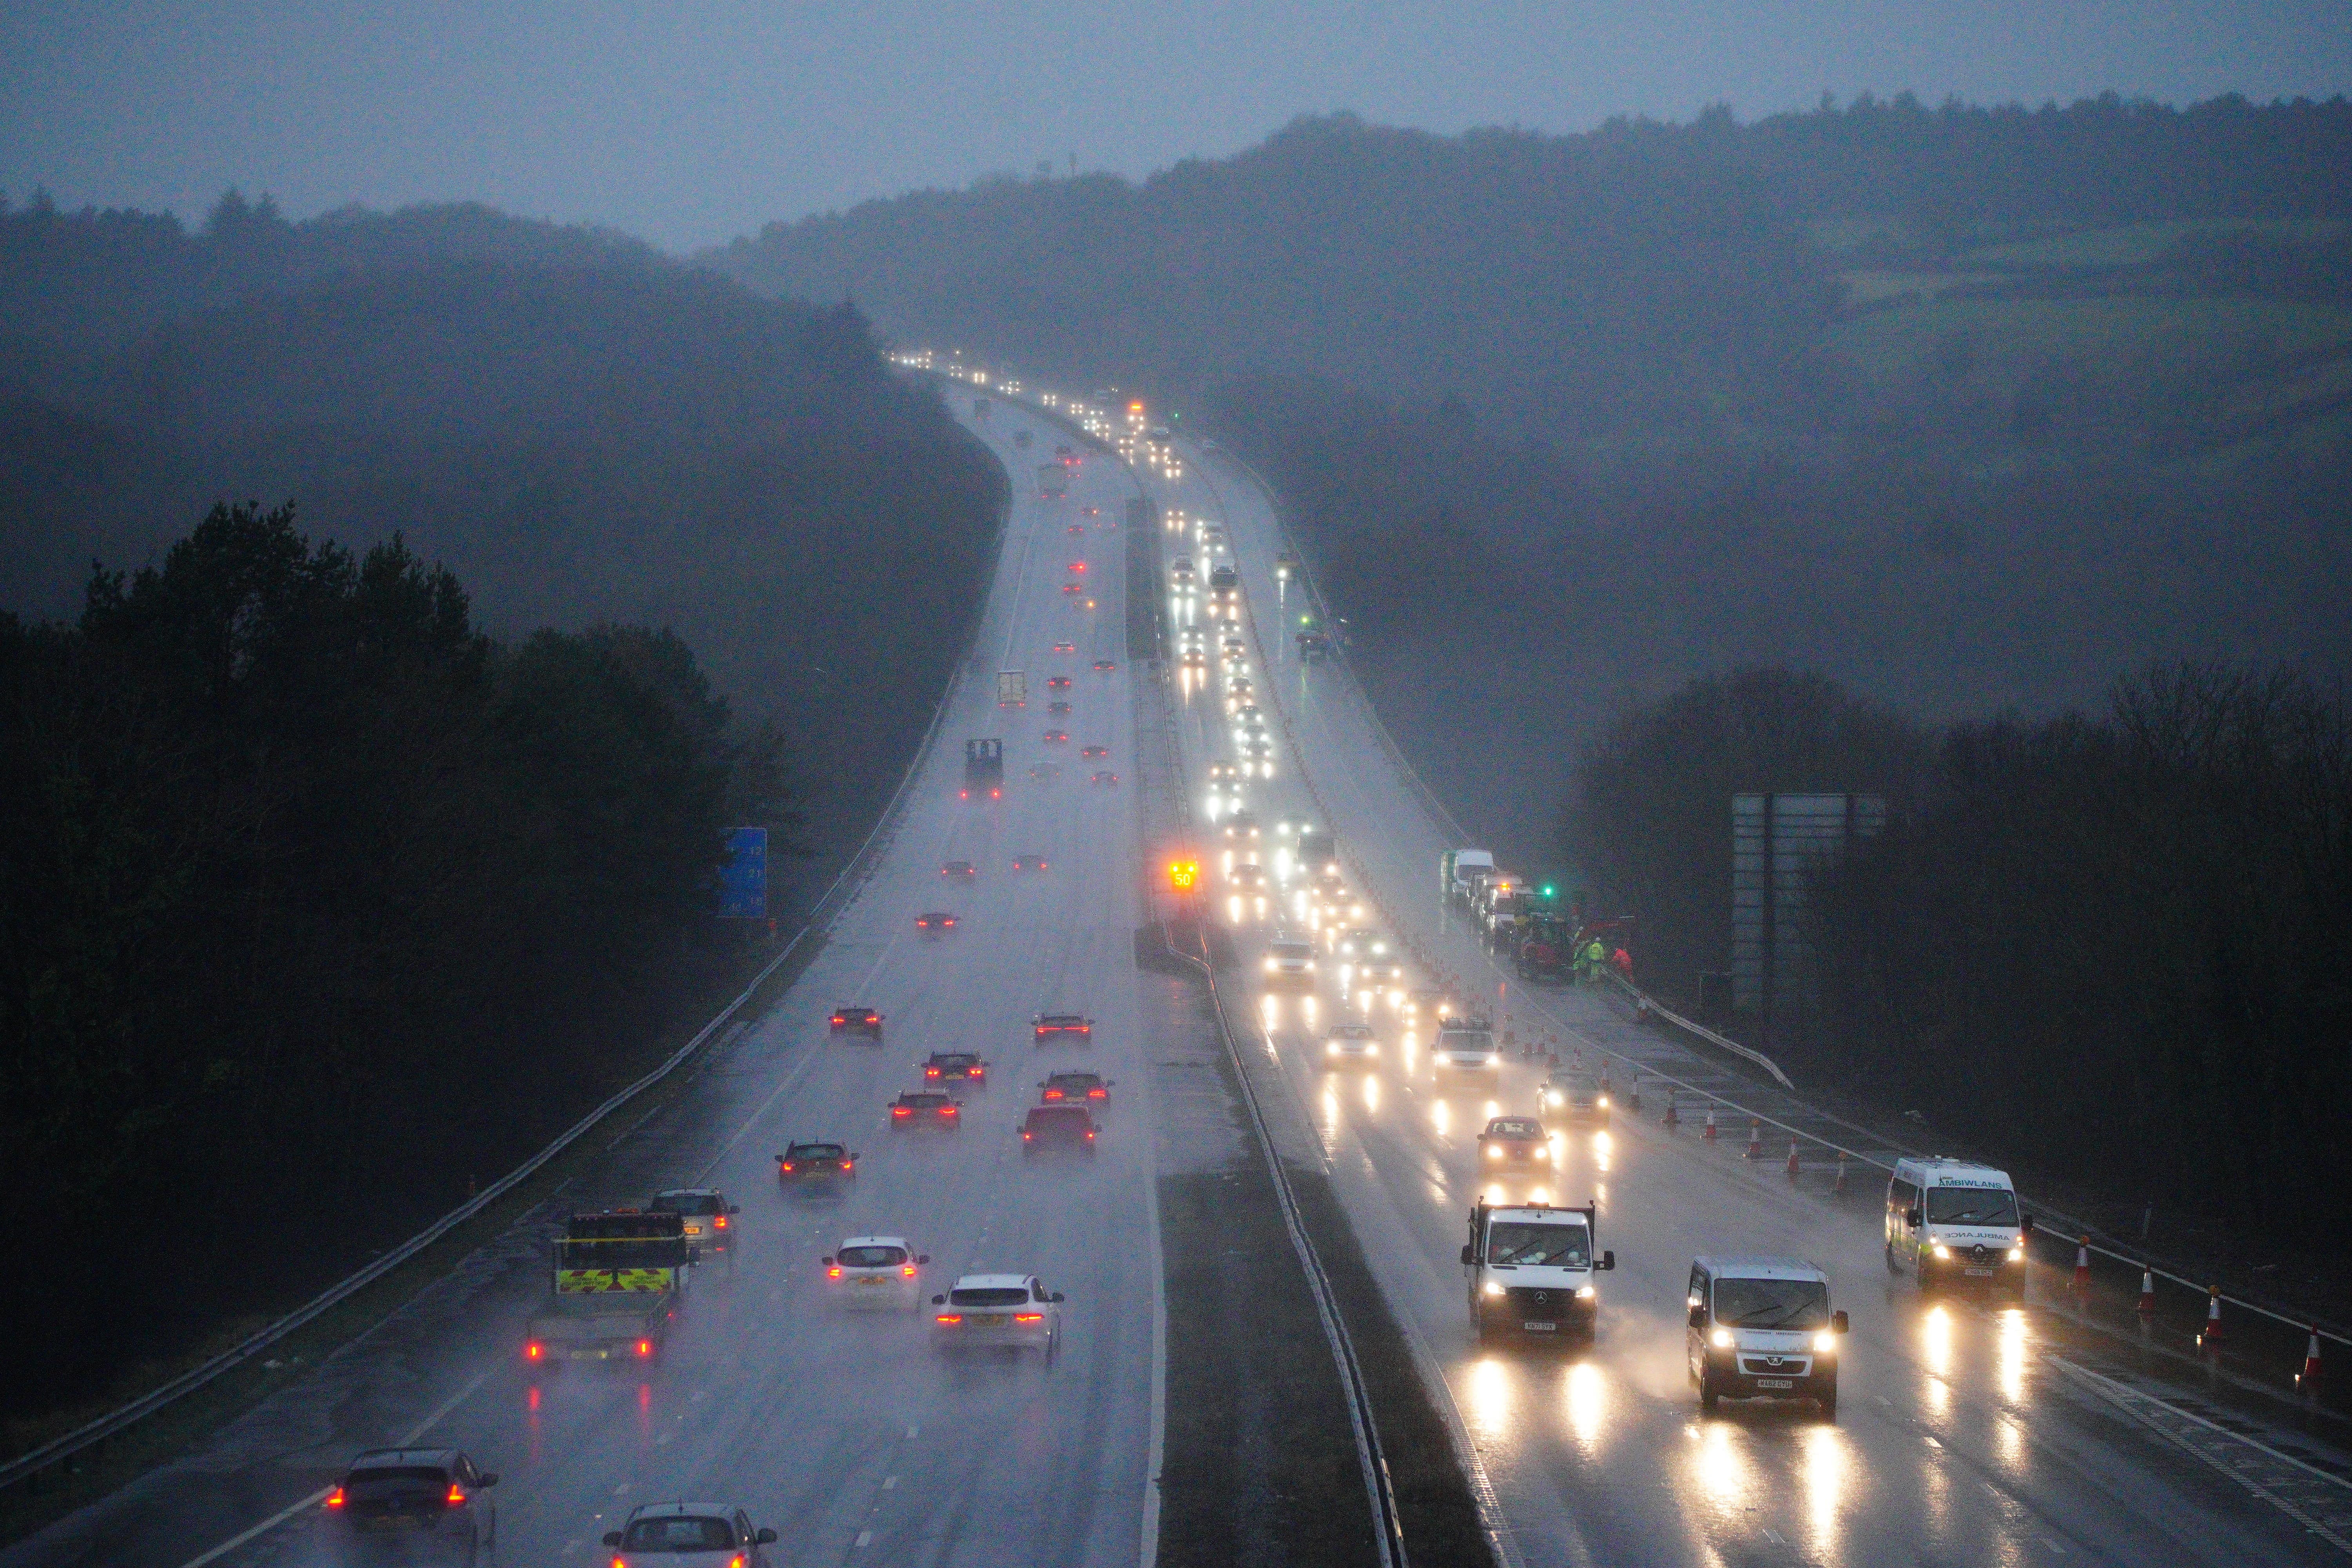 The warmer weather follows a forecast of heavy rain a gusty winds that hit the UK over Easter